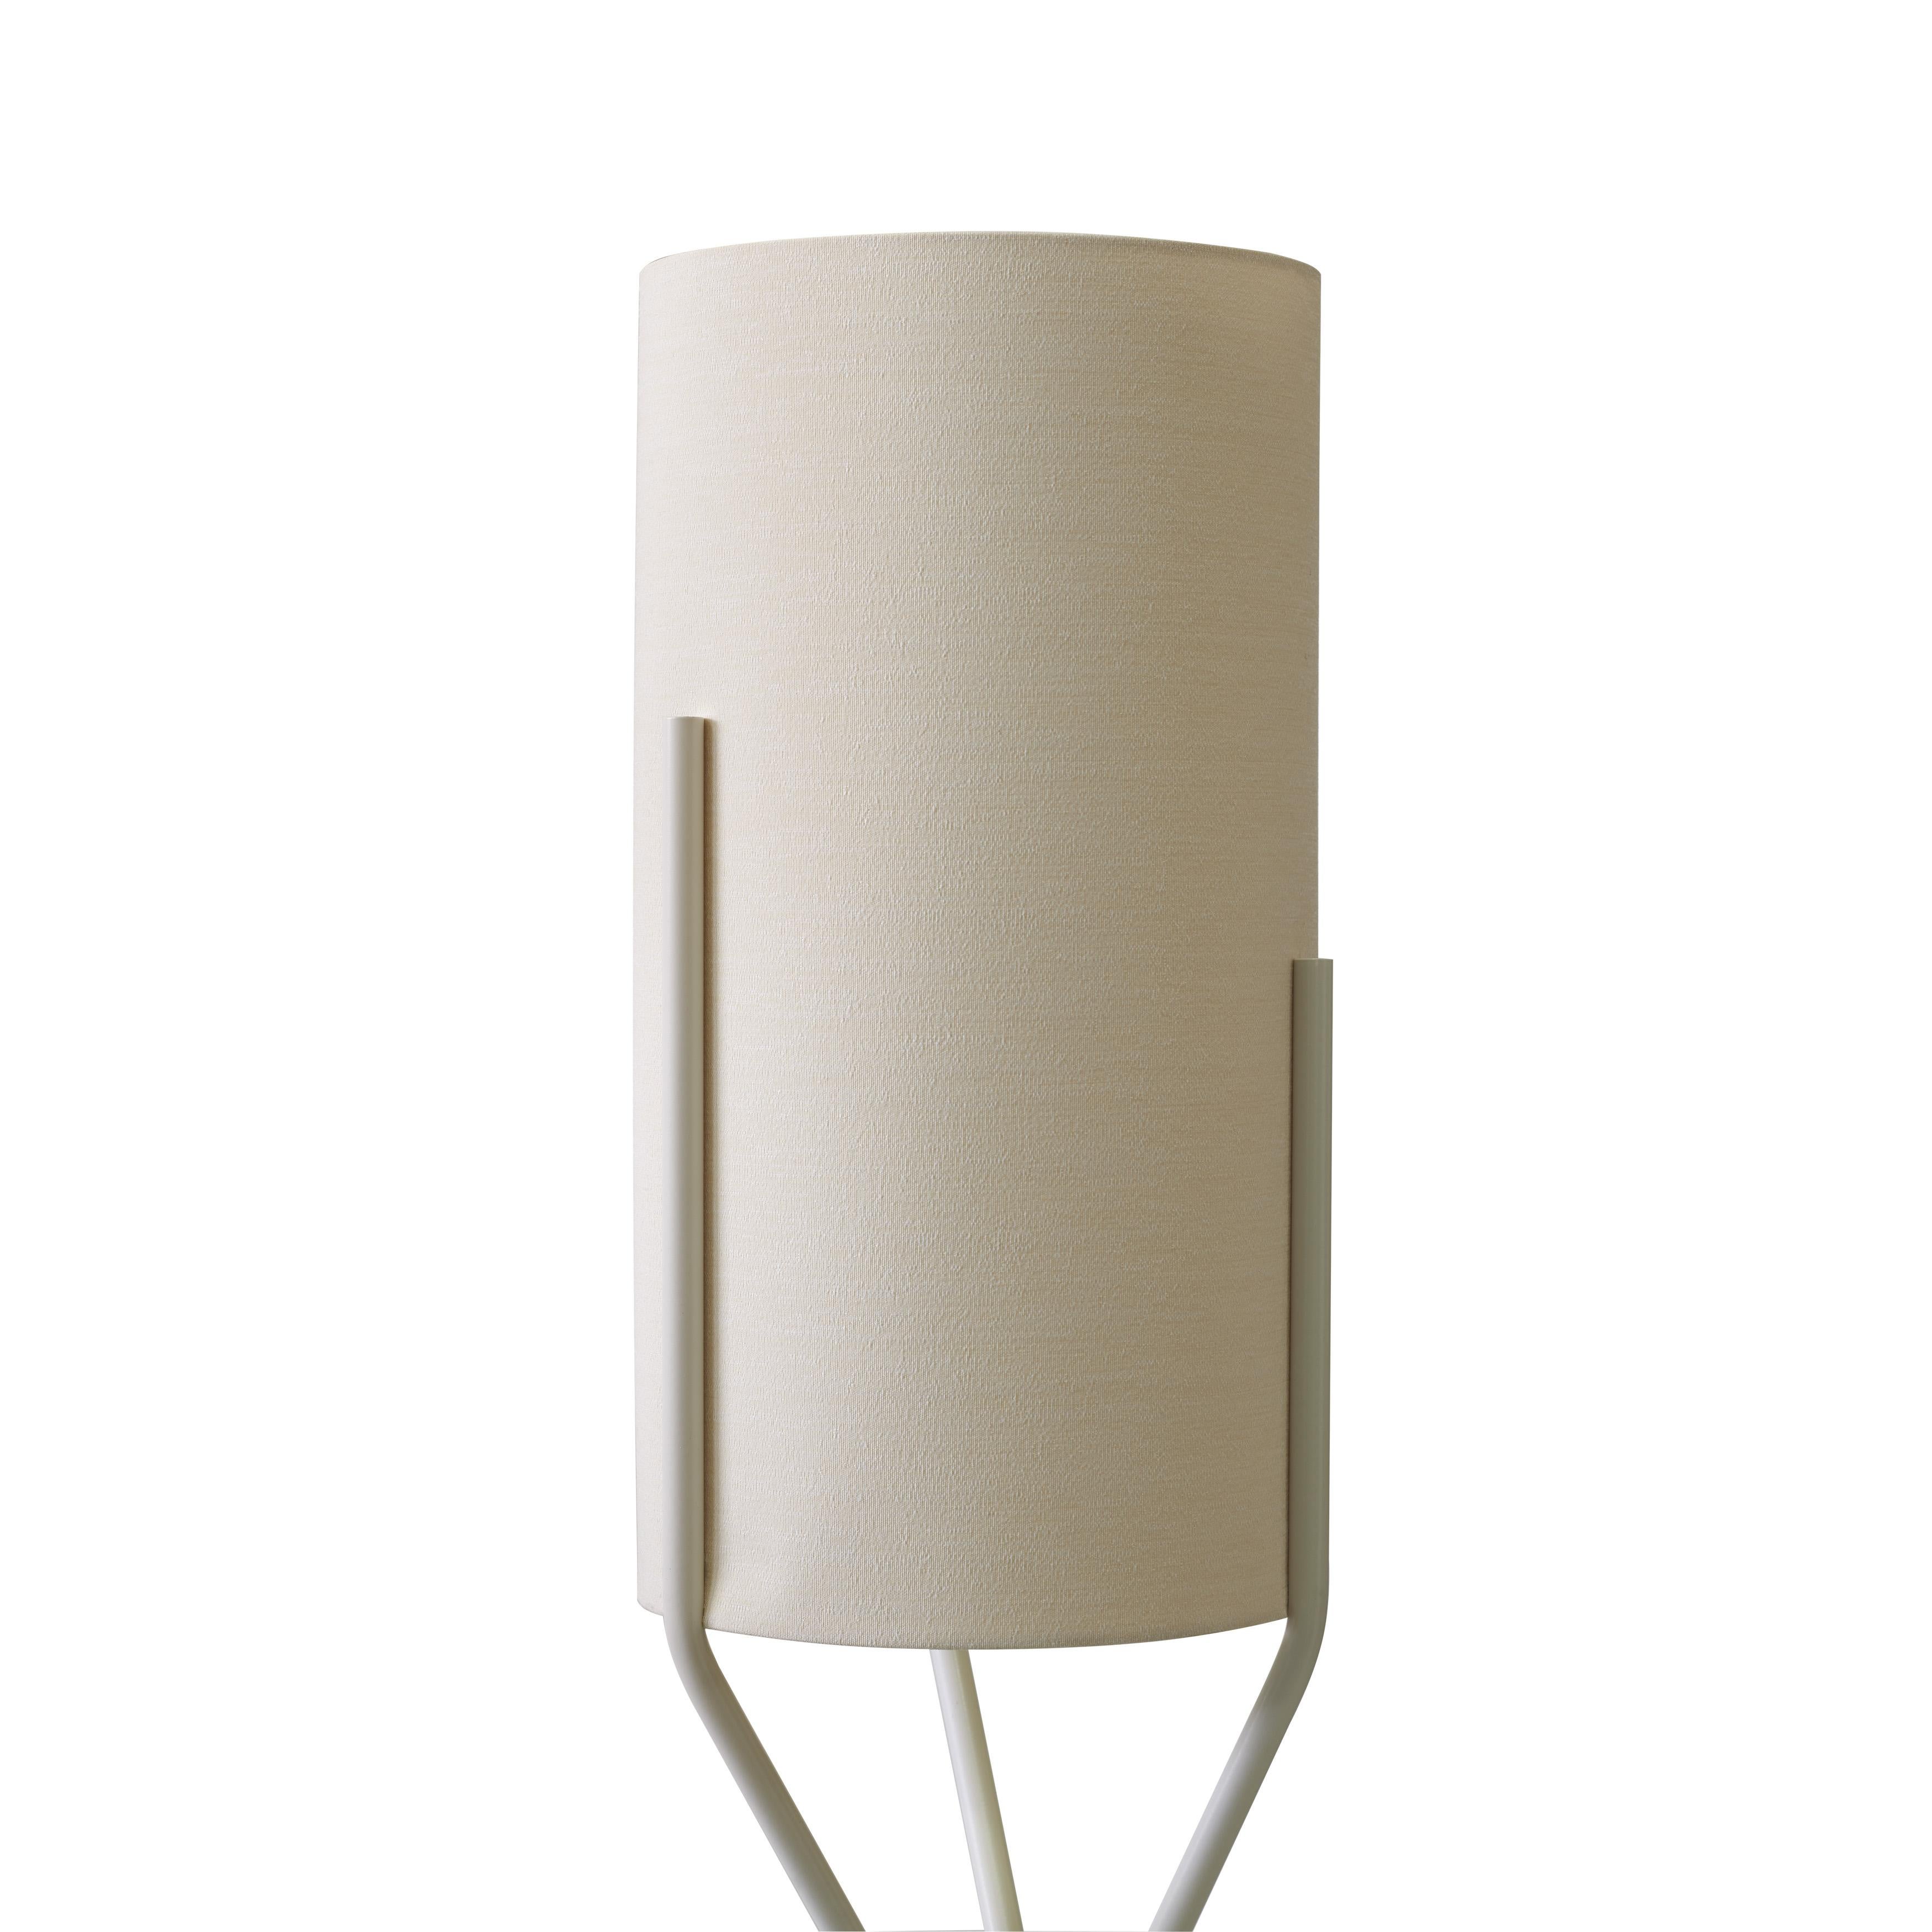 Three delicate embedded stems embrace a cylindrical lampshade: the result is Aura, the new floor lamp created by Ilaria Marelli. The stem is in painted iron, the lampshade in waterproof fabric, as this floor lamp is especially thought for an outdoor